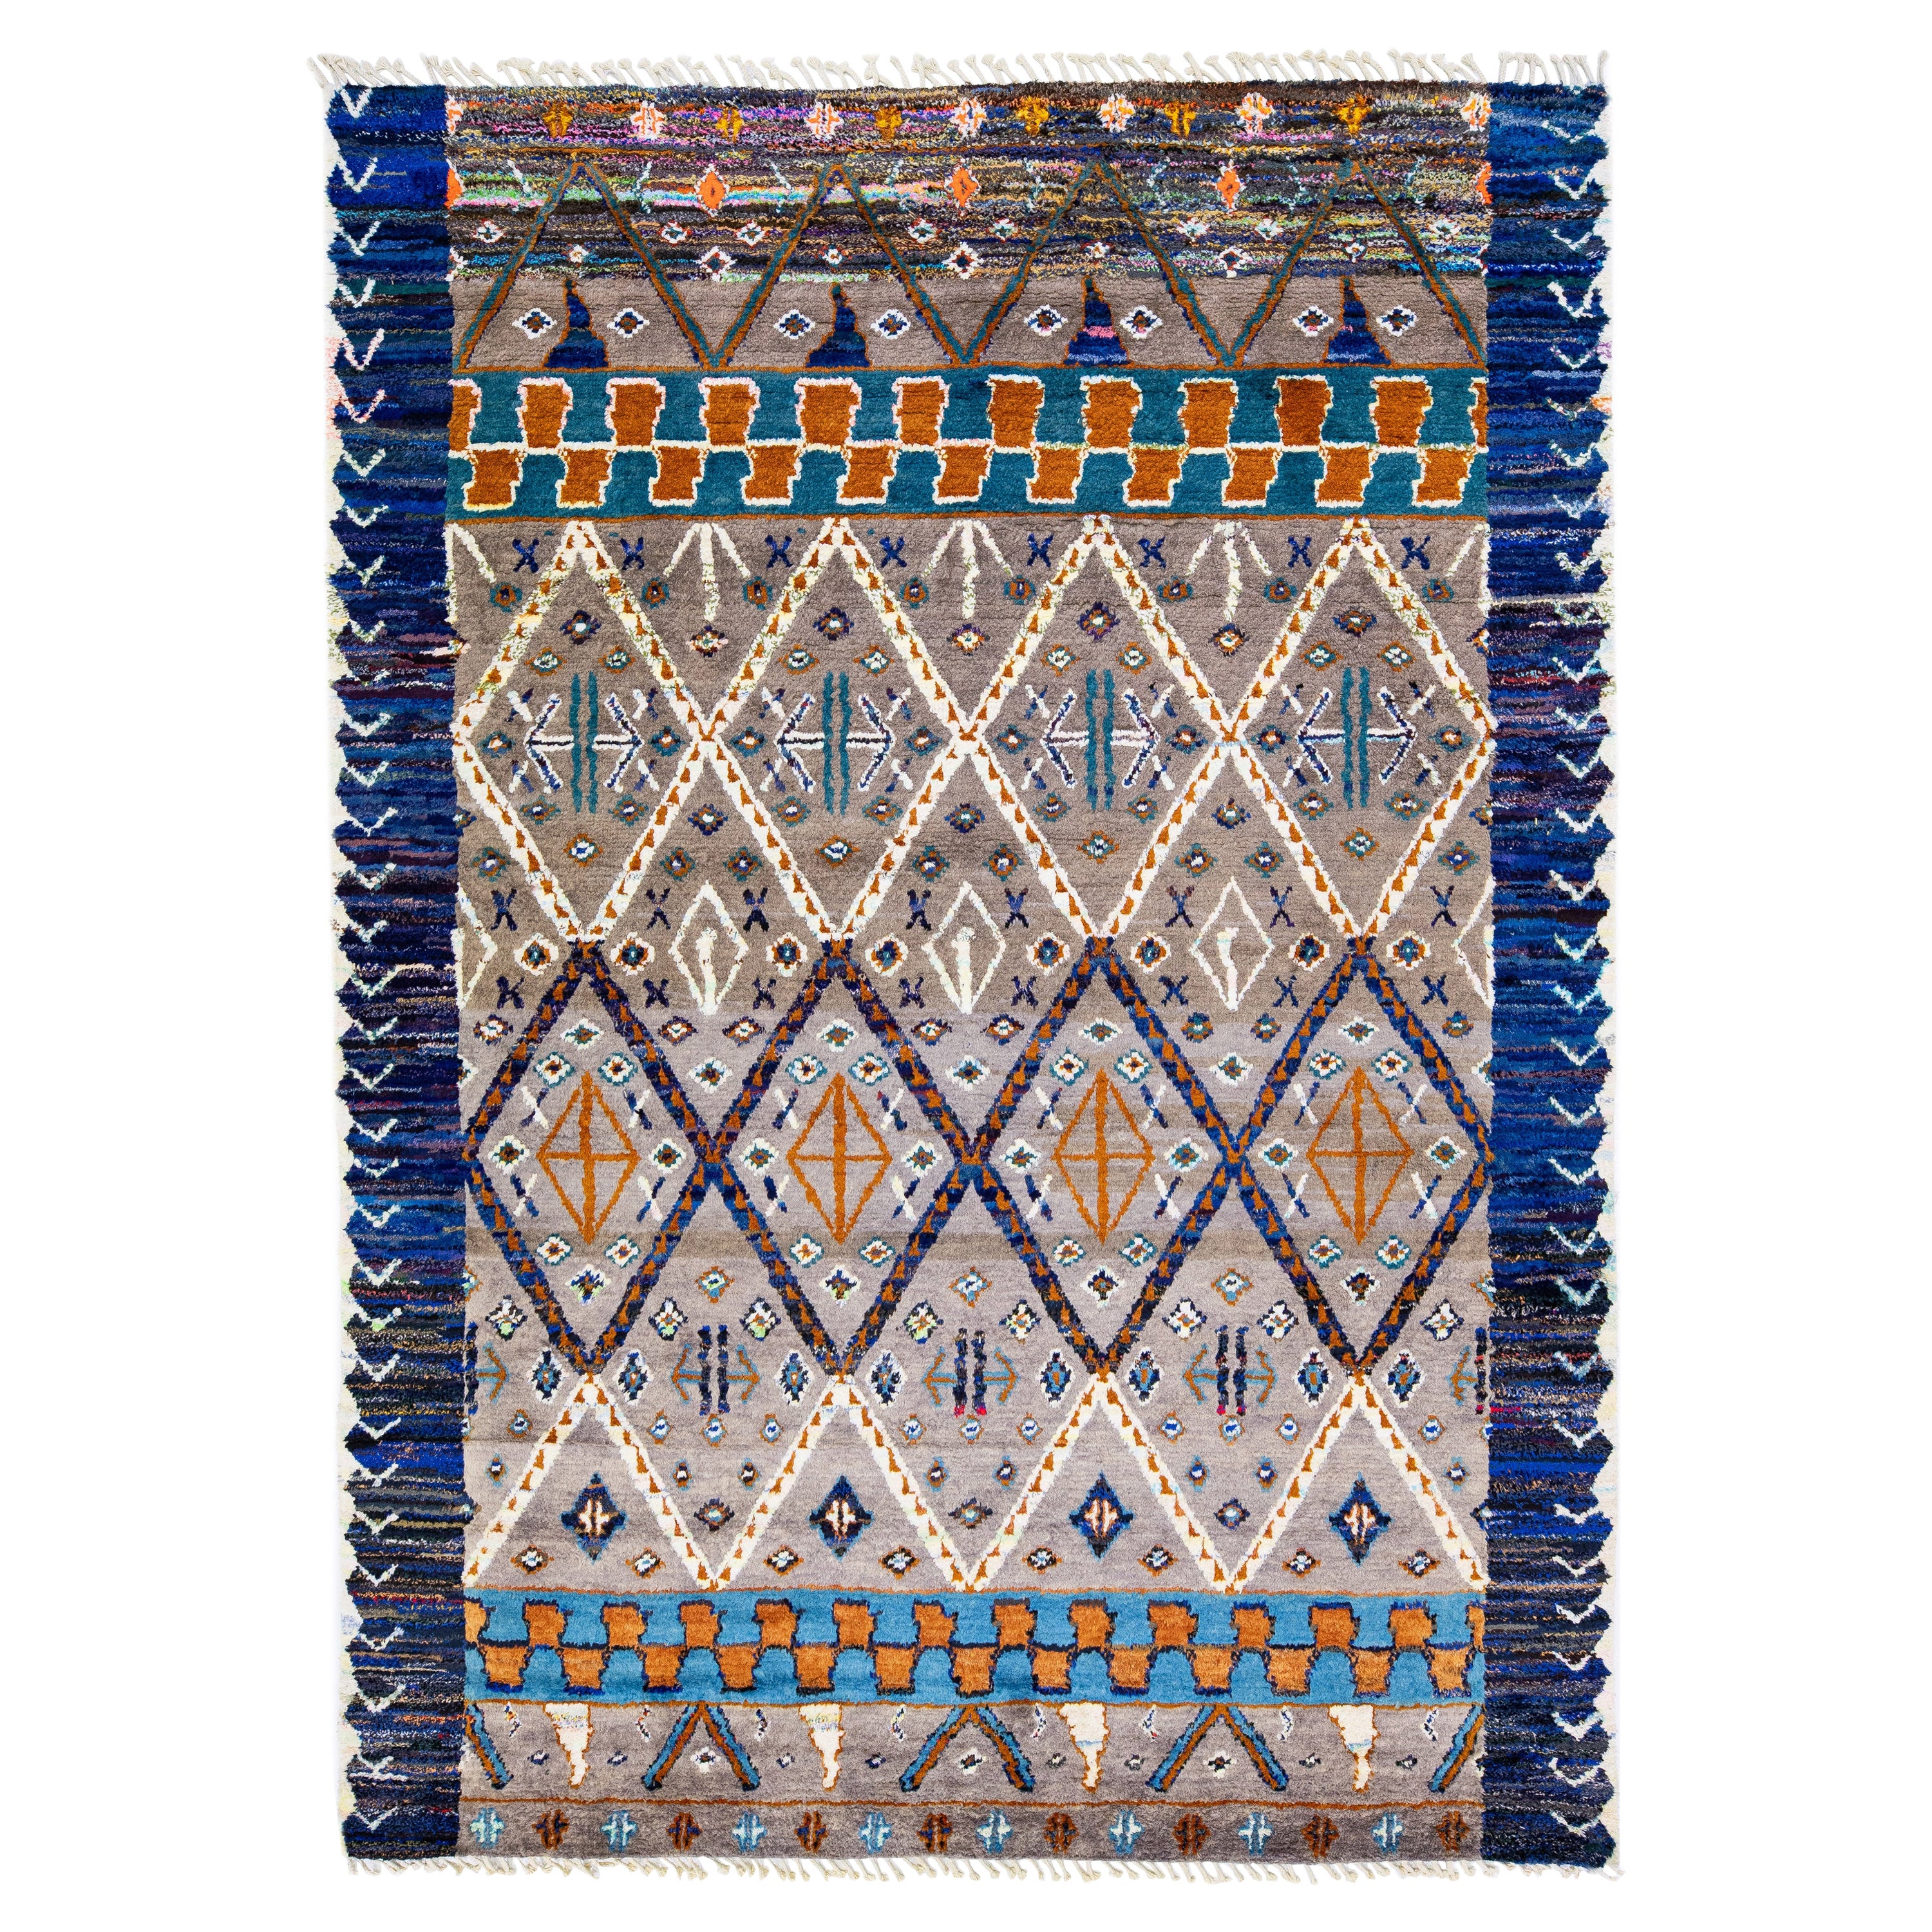 Modern Moroccan Style Handmade Multicolor Wool Rug with Tribal Motif